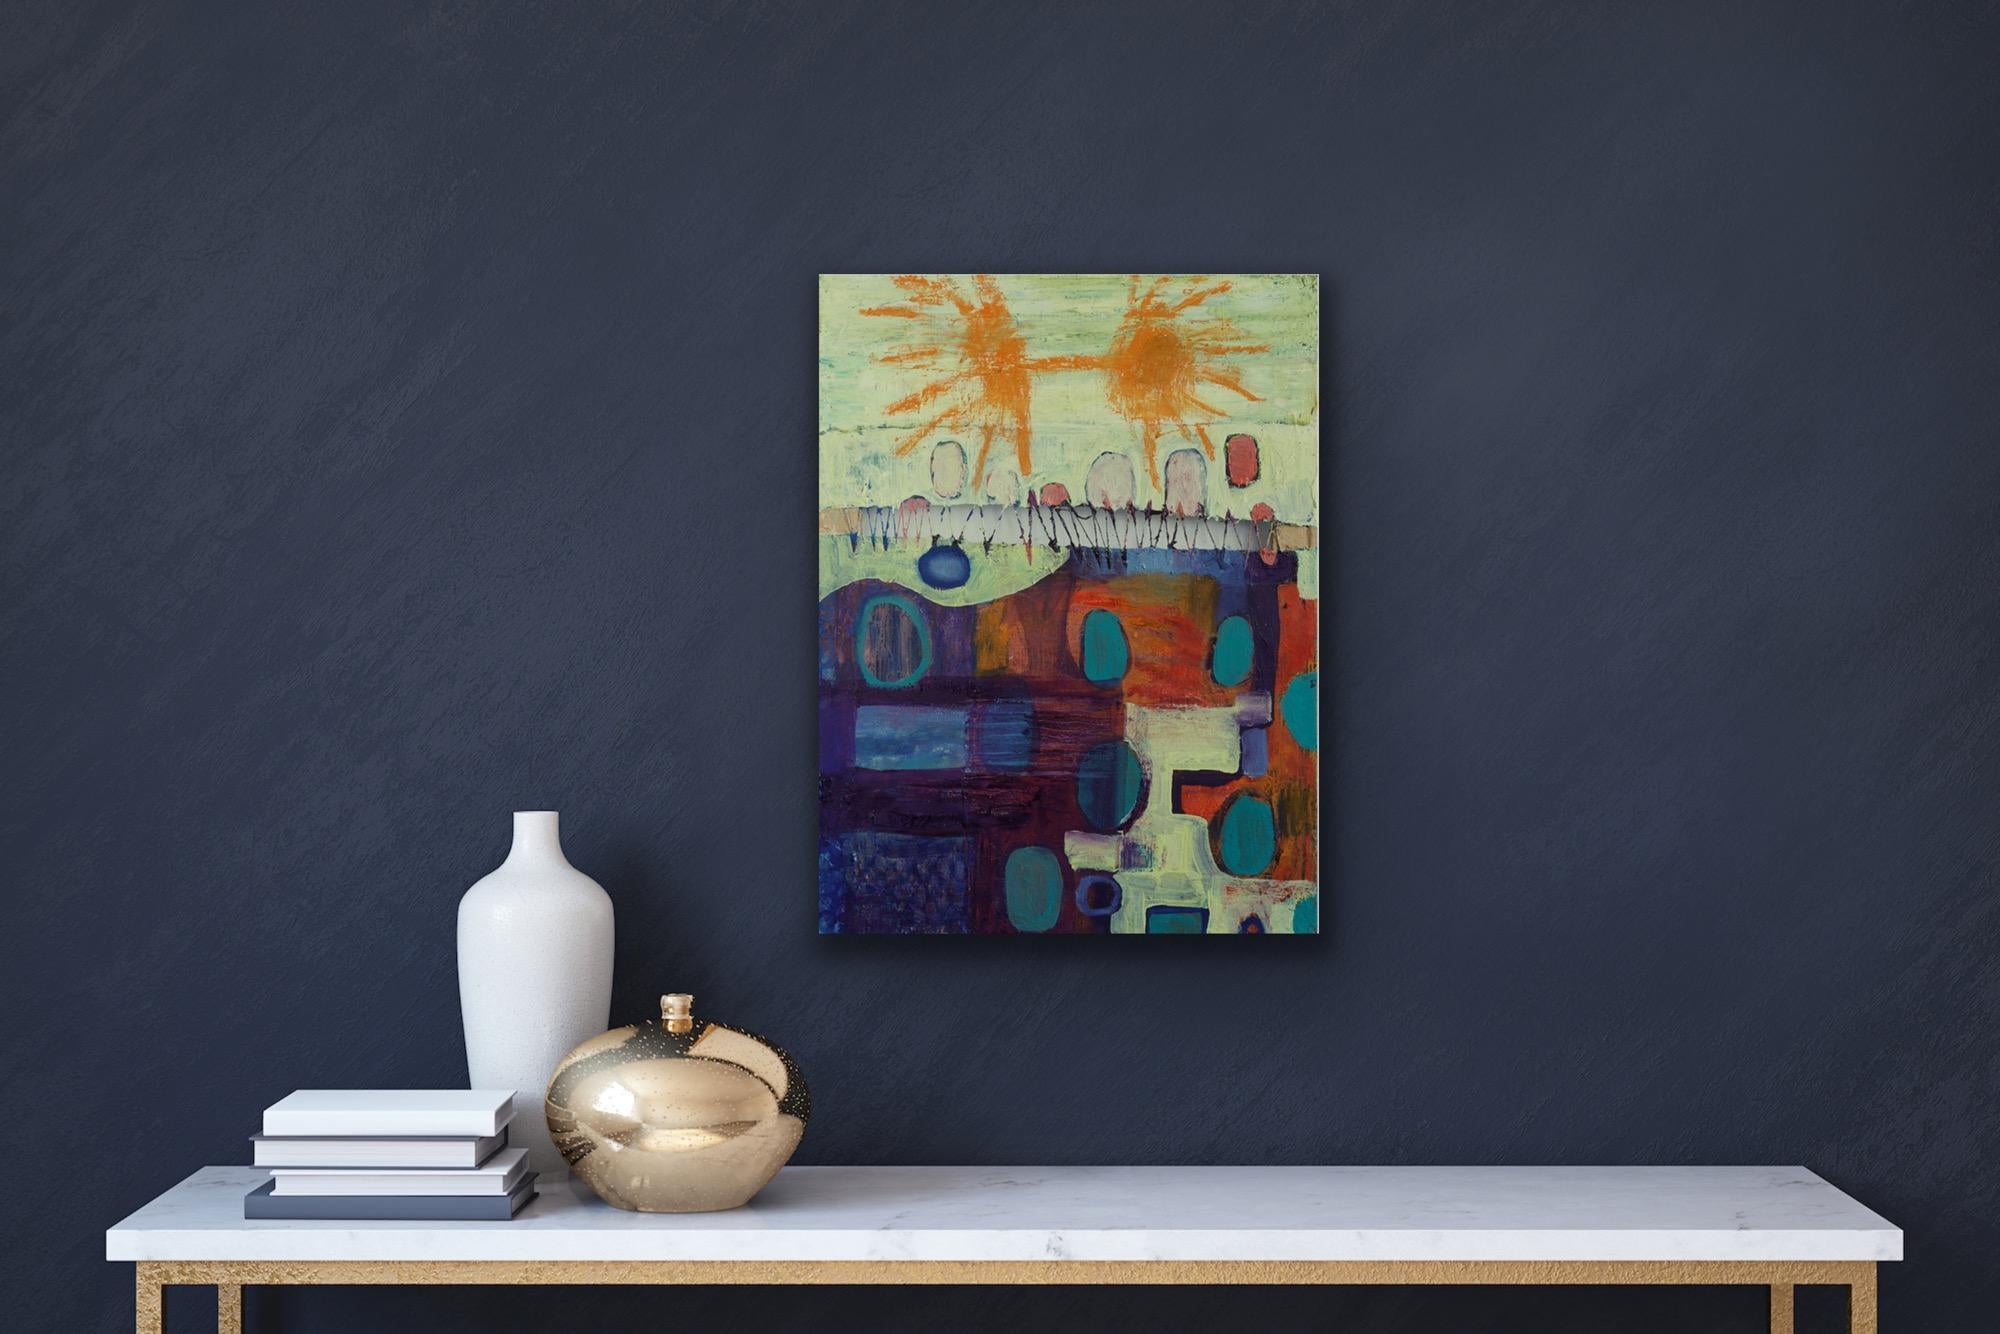 Two Suns, stitched canvas urban landscape abstraction - Painting by Cecilia André 